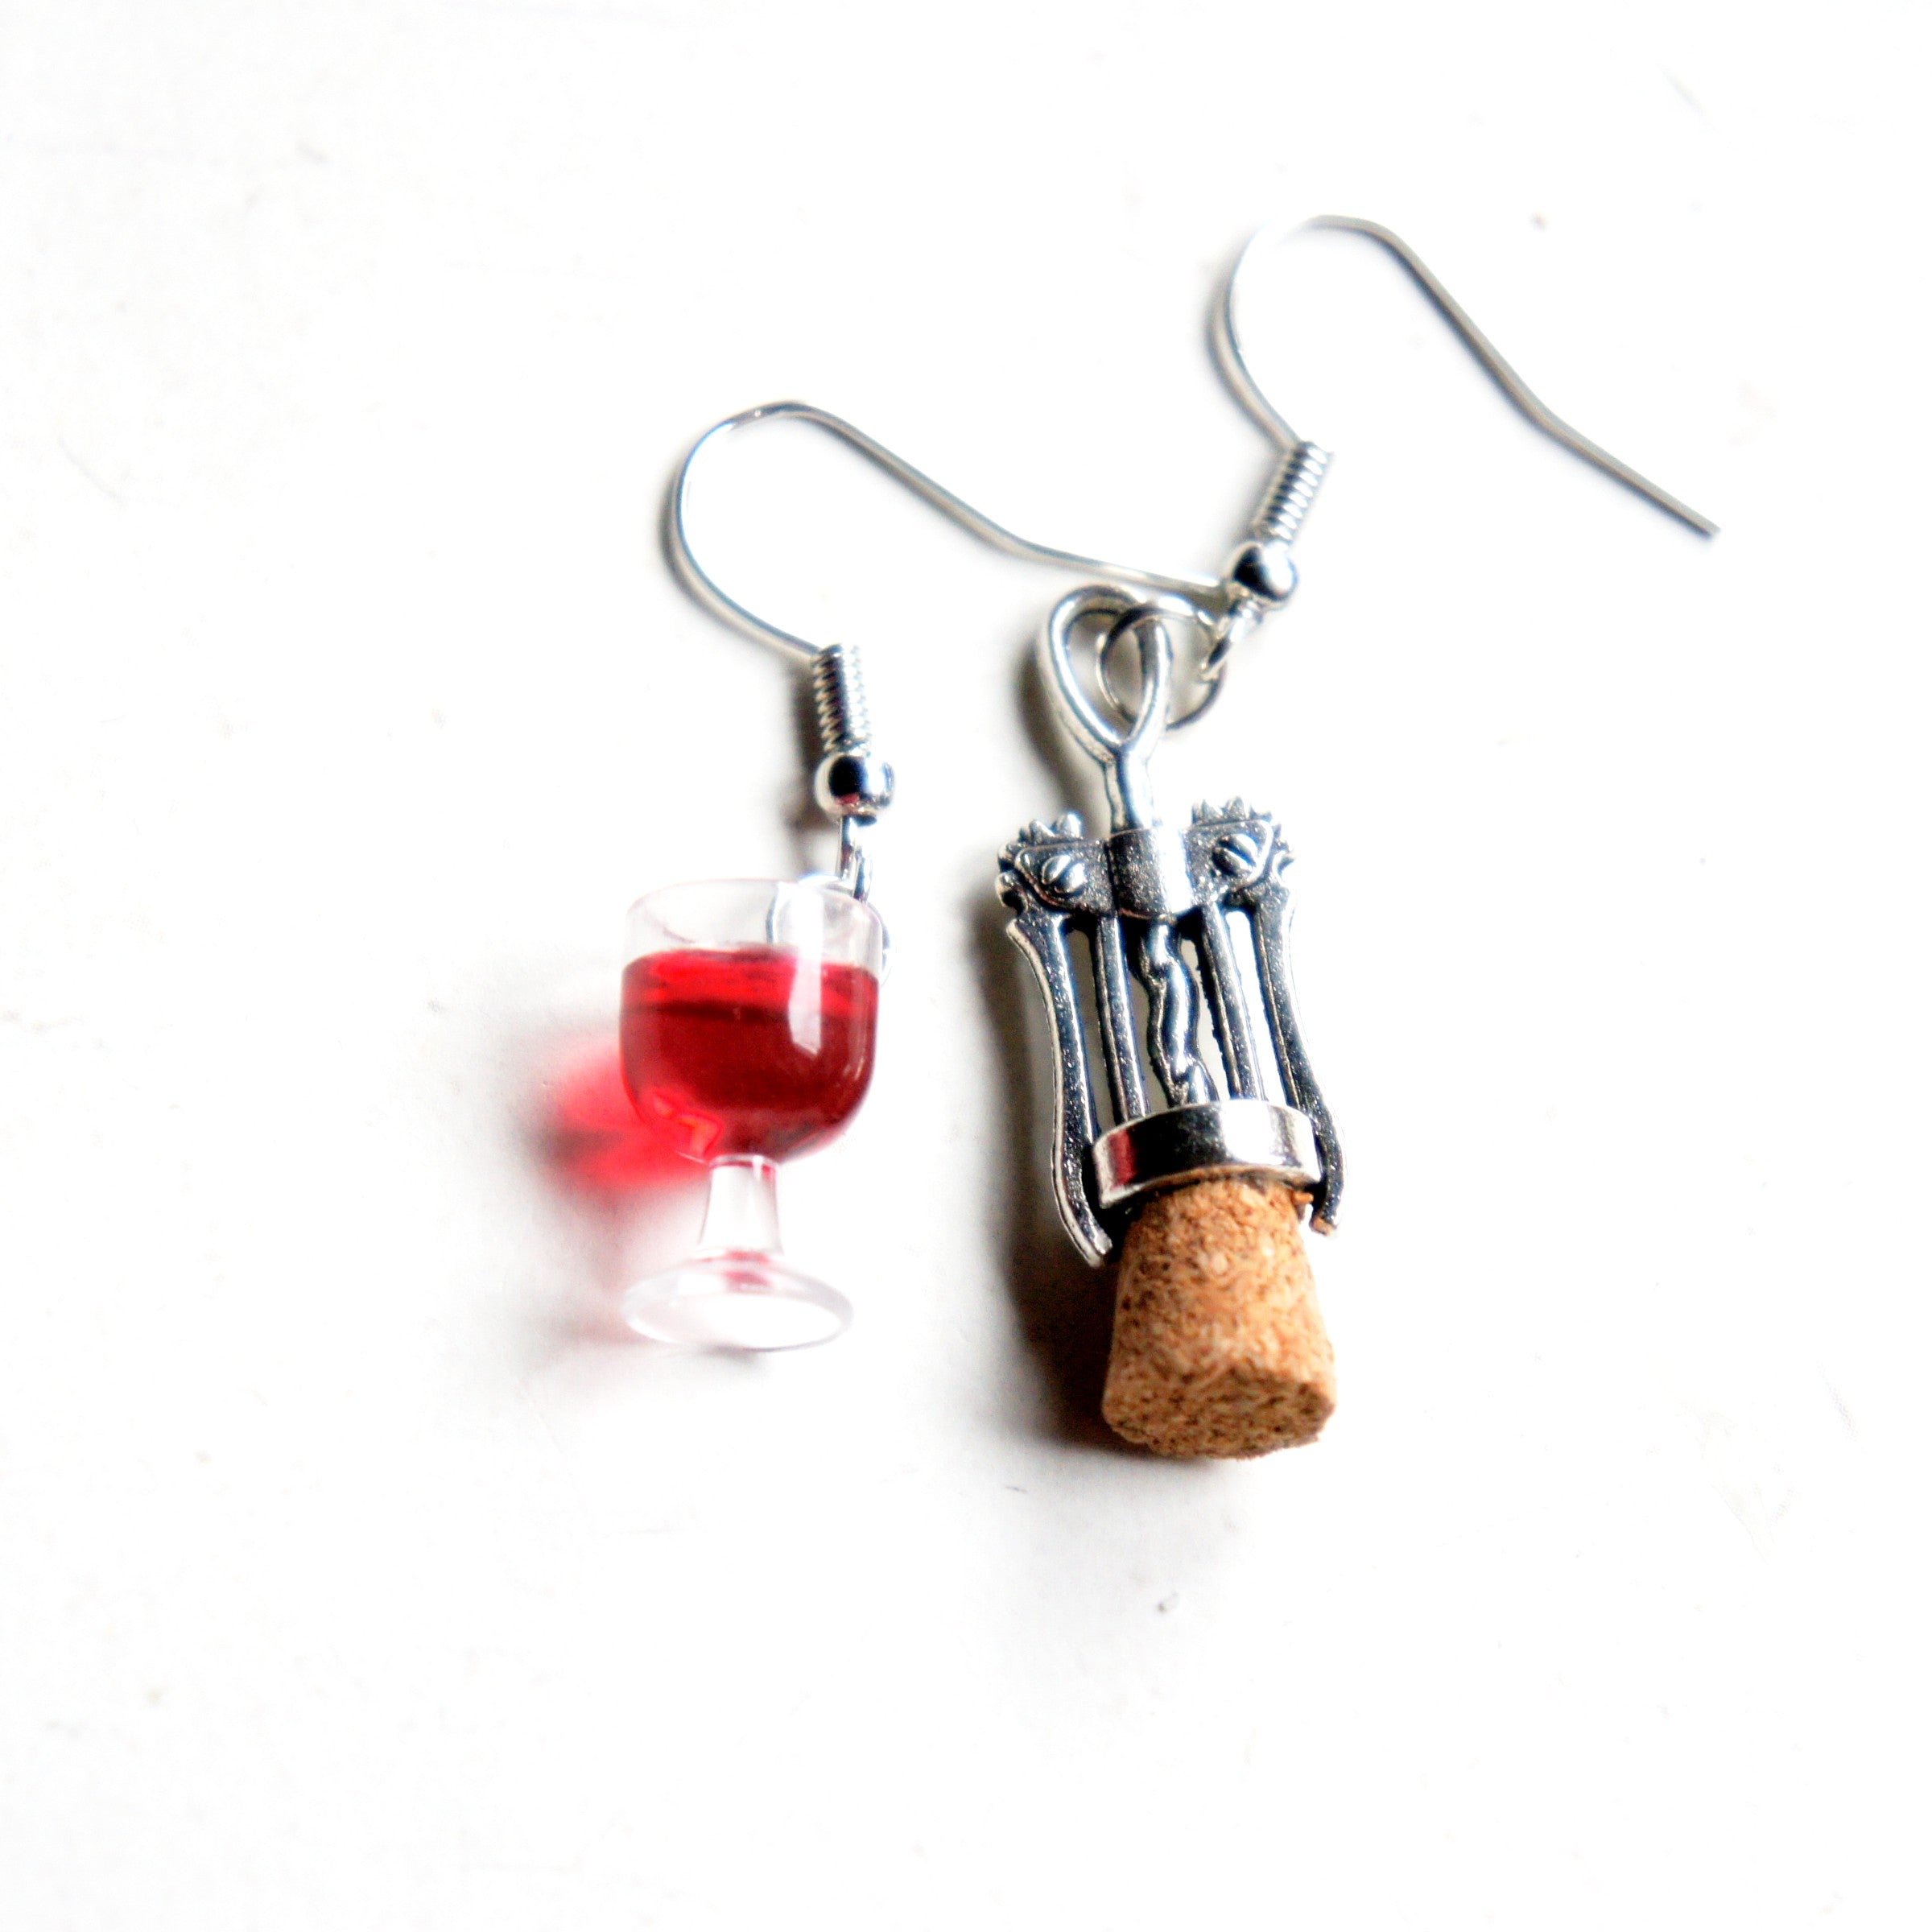 Wine Dangle Earrings - Jillicious charms and accessories